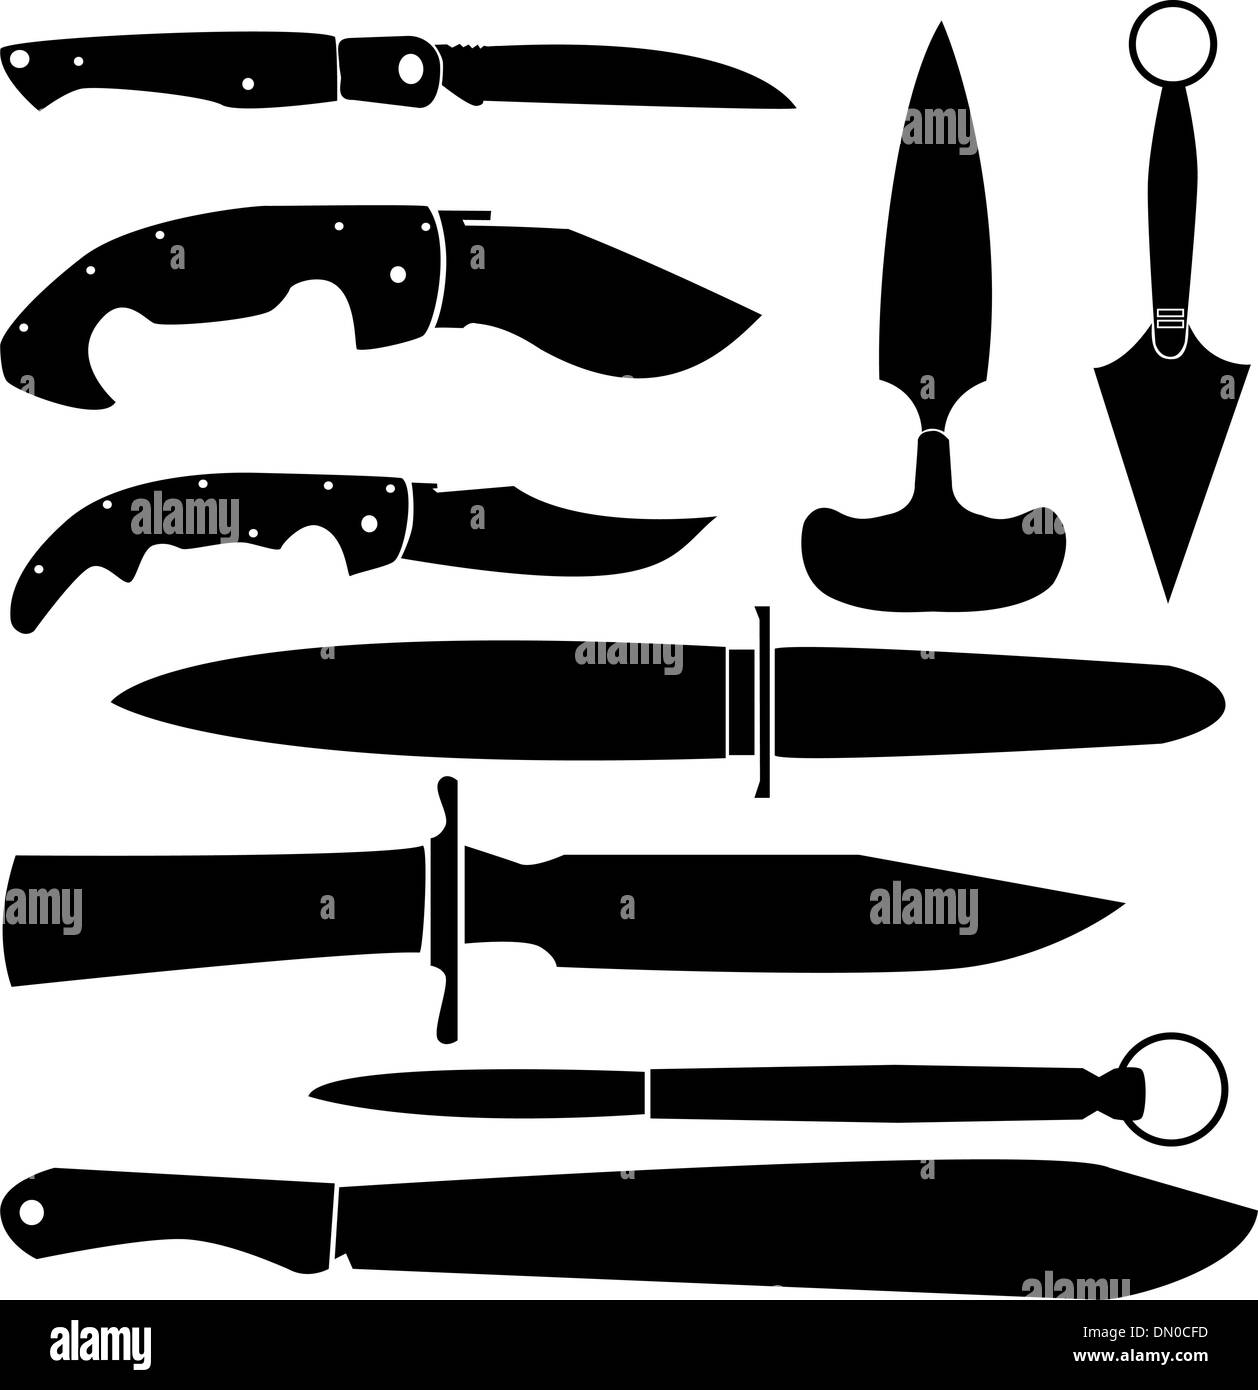 Knives vector silhouettes Stock Vector